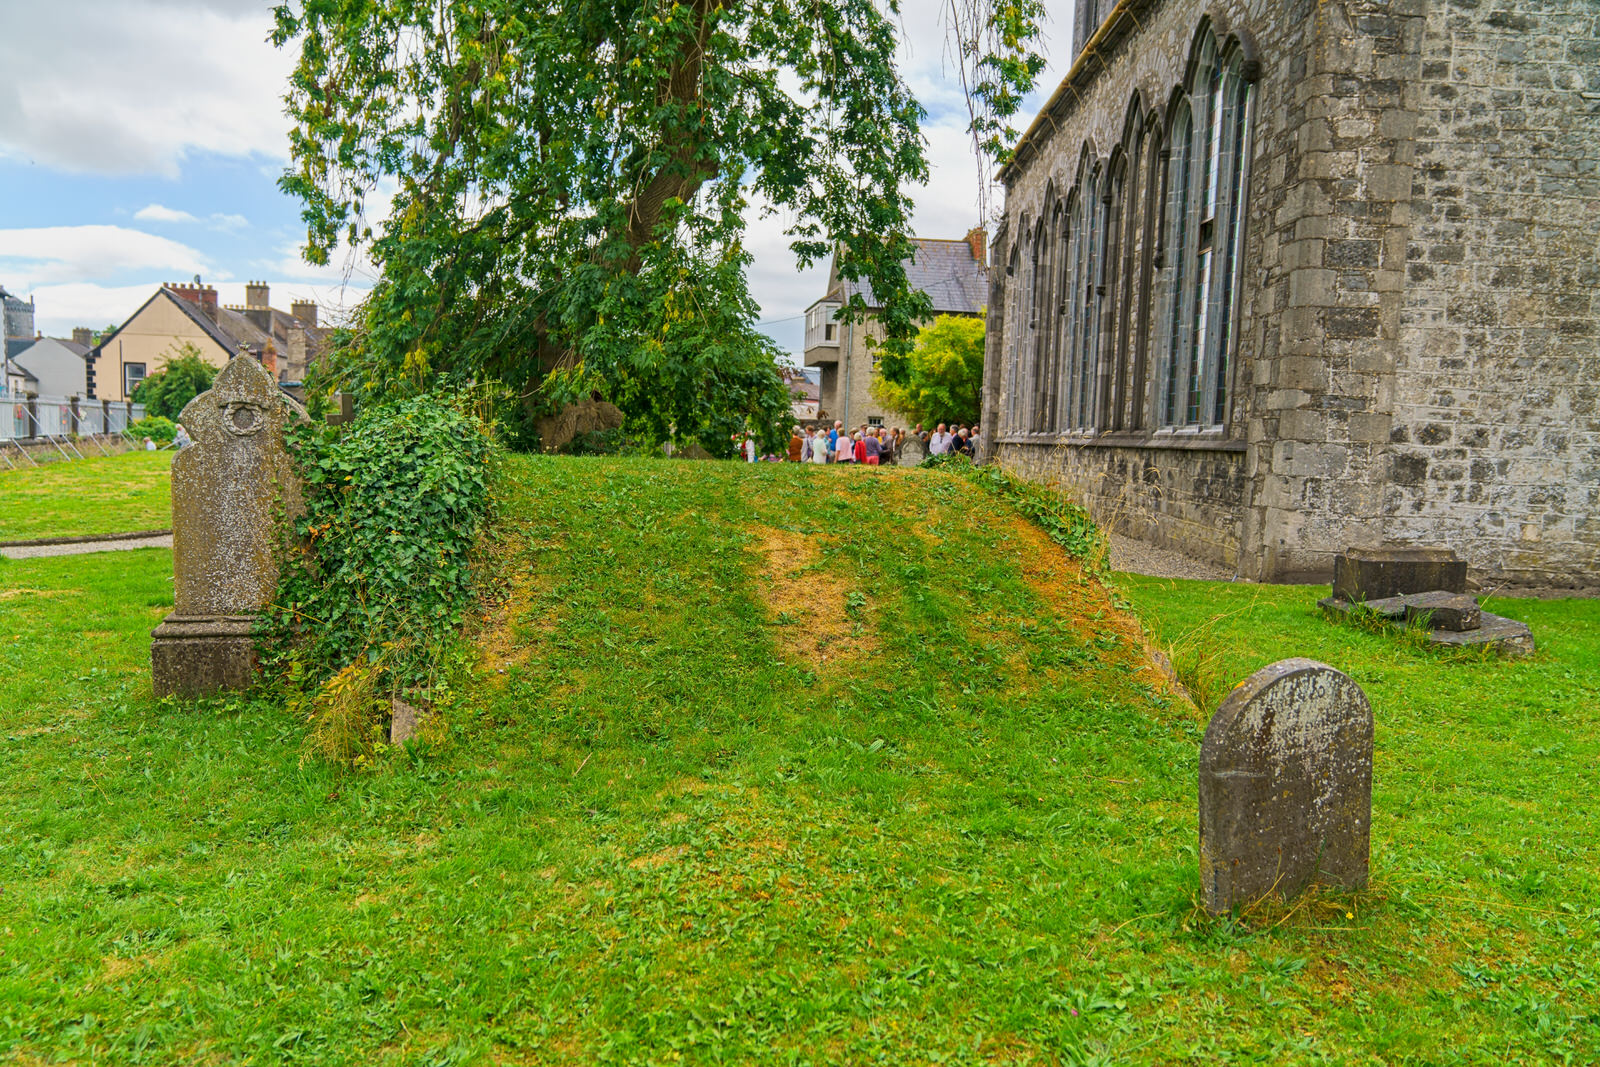 THE OLDER ST JOHN'S CHURCH IN KILKENNY AUGUST 2018 [ANGLICAN COMMUNION]-234329-1